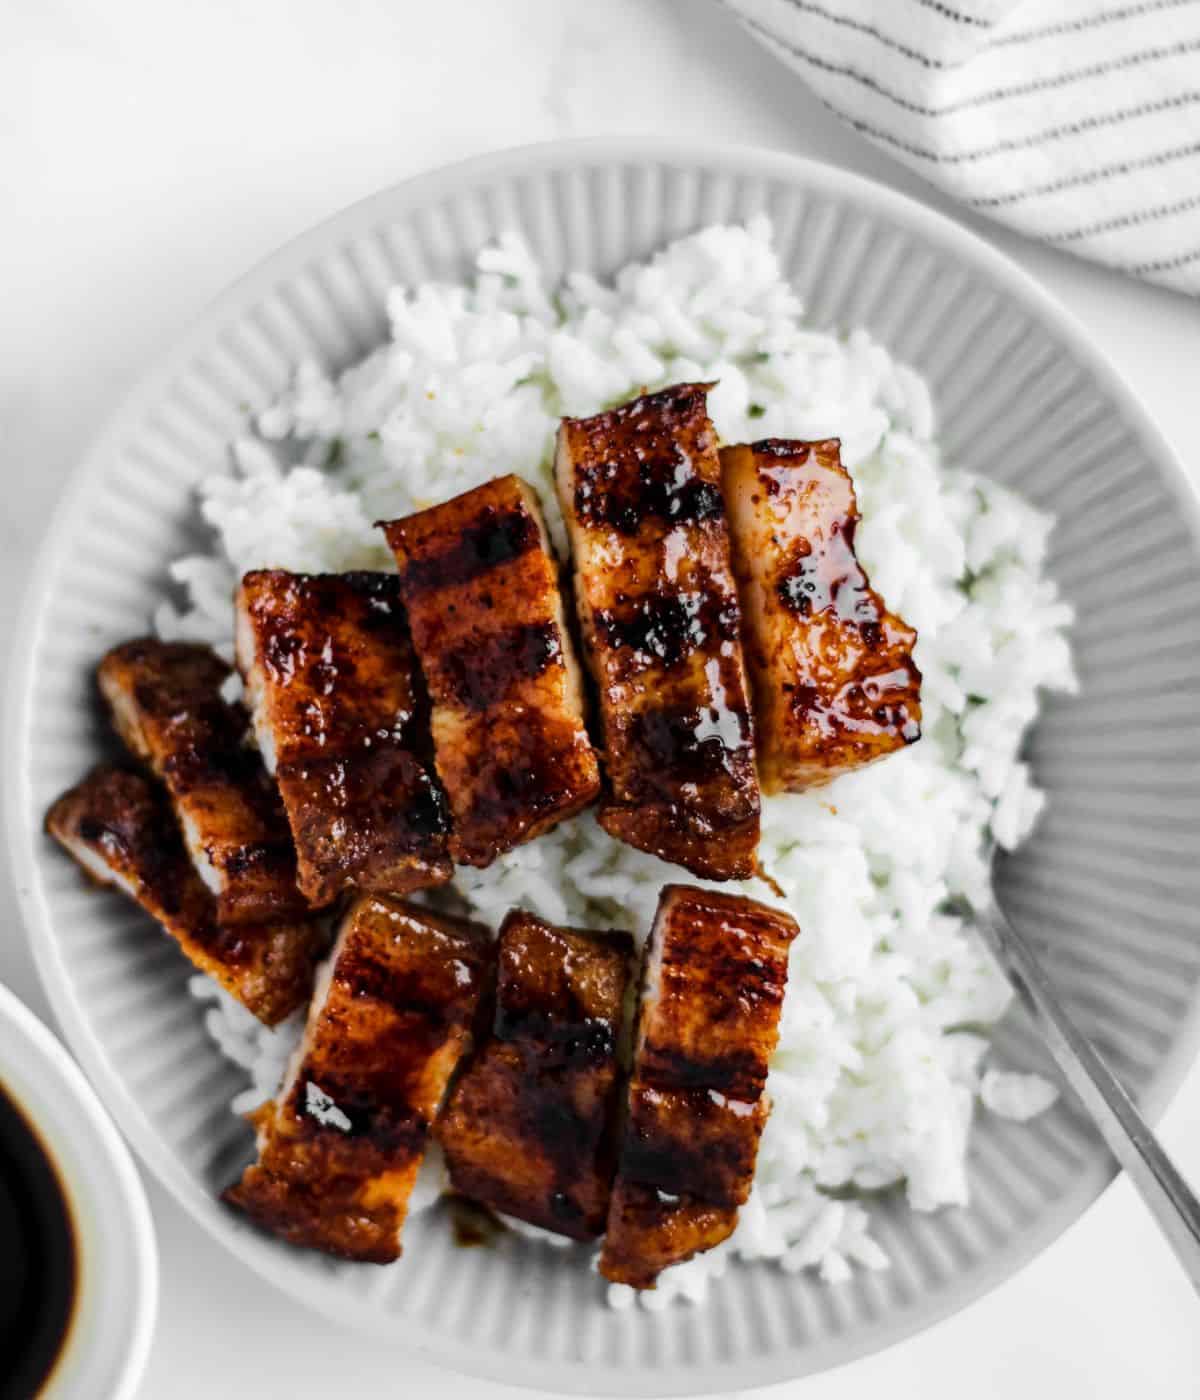 Pork belly liempo with rice on a table.